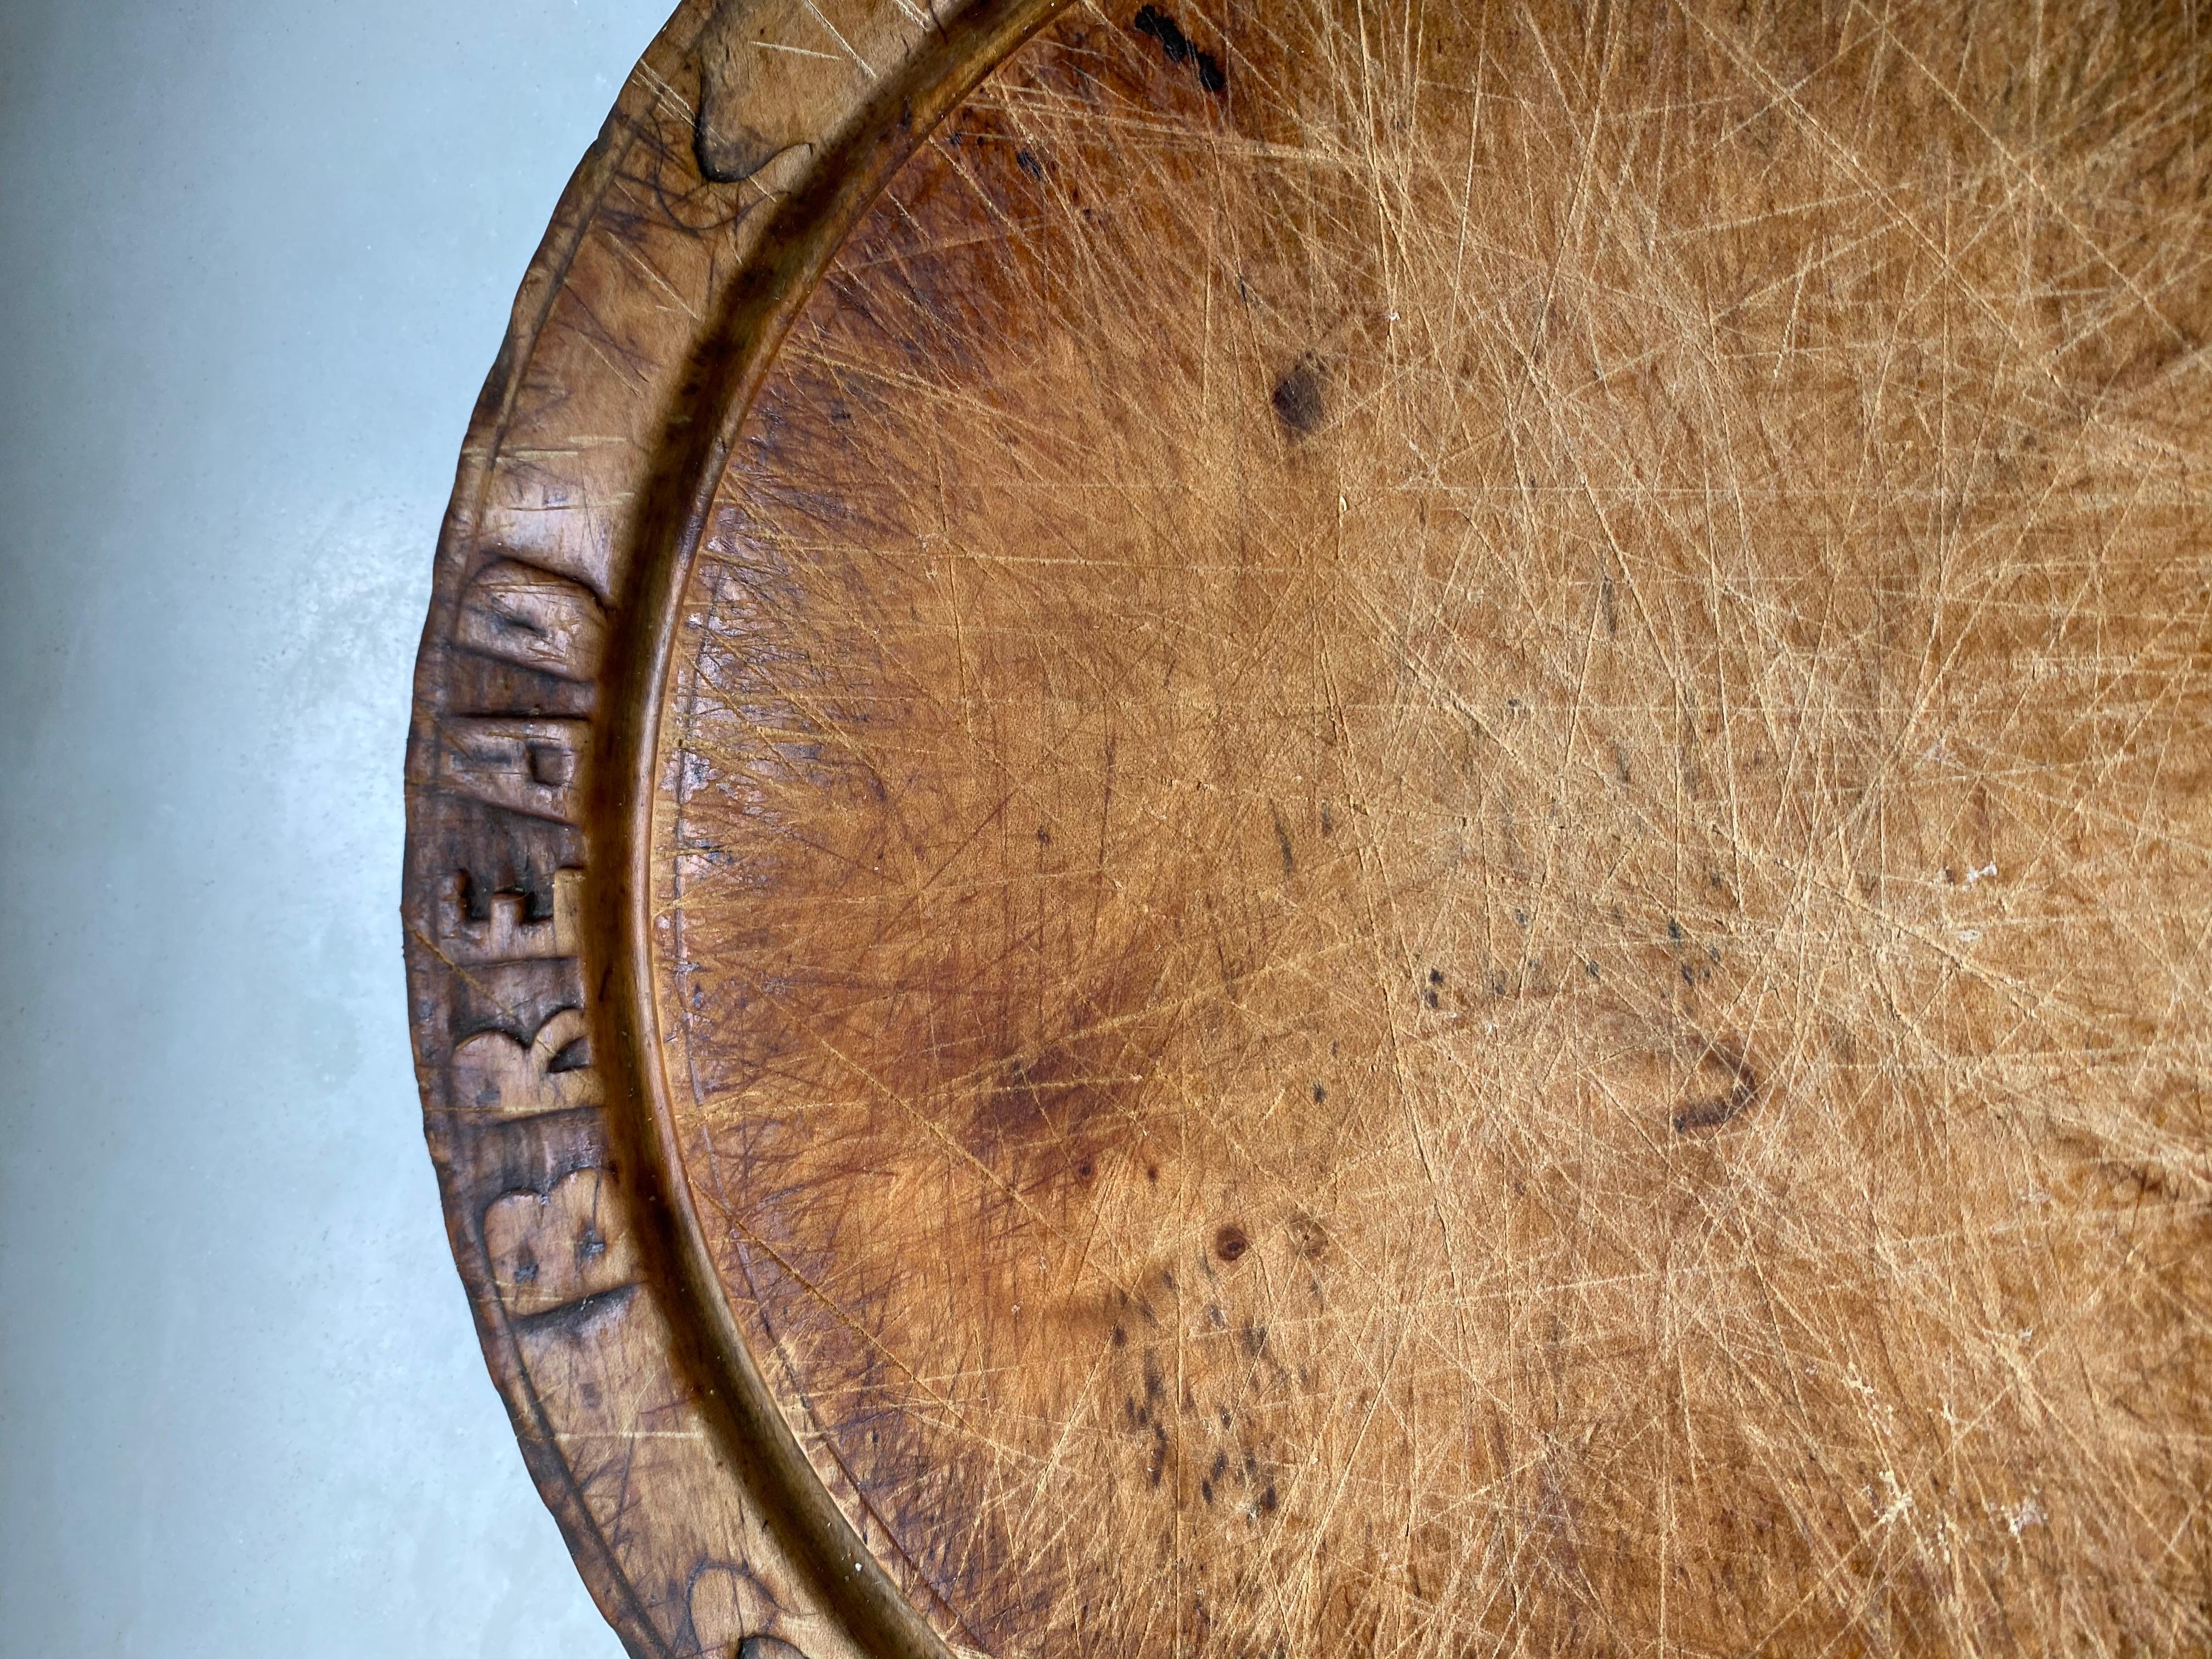 Once standard item found in an English country home, these antique Victorian hand carved breadboard have become a rarity. This particular one has a warm timeless rich aged patina. The bread board is hand carved with 